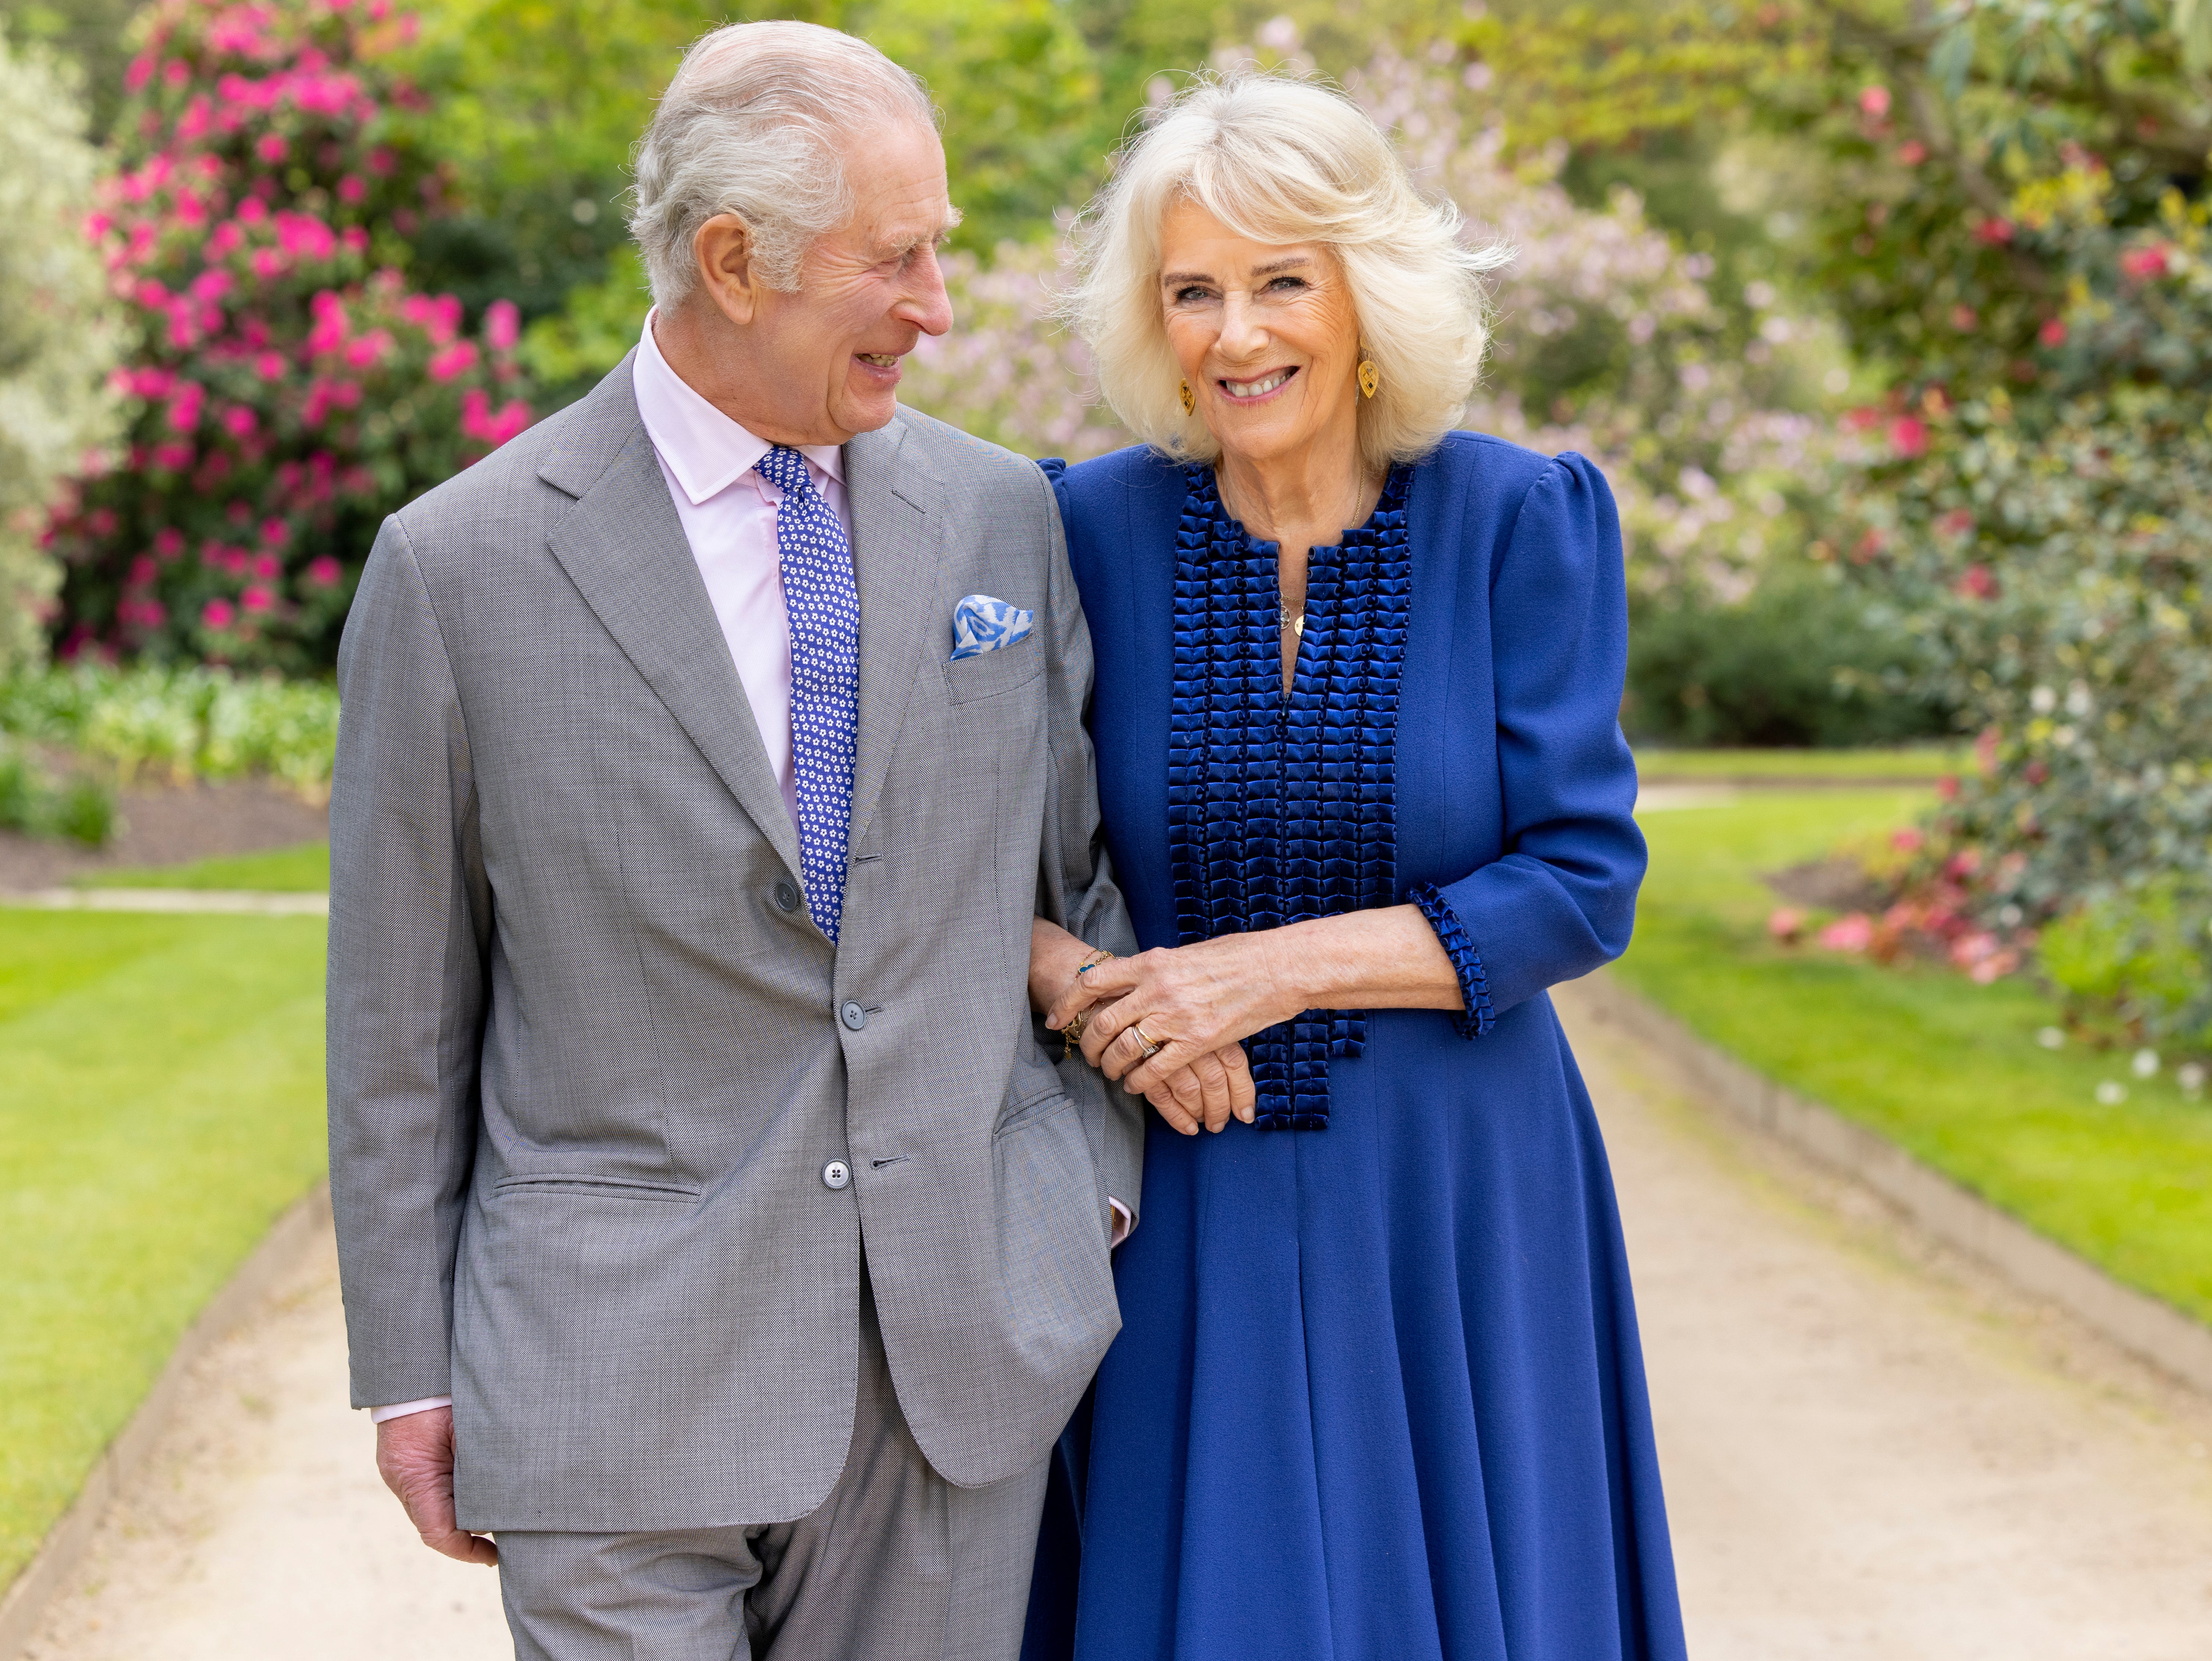 The King and Camilla released a photograph to mark the announcement